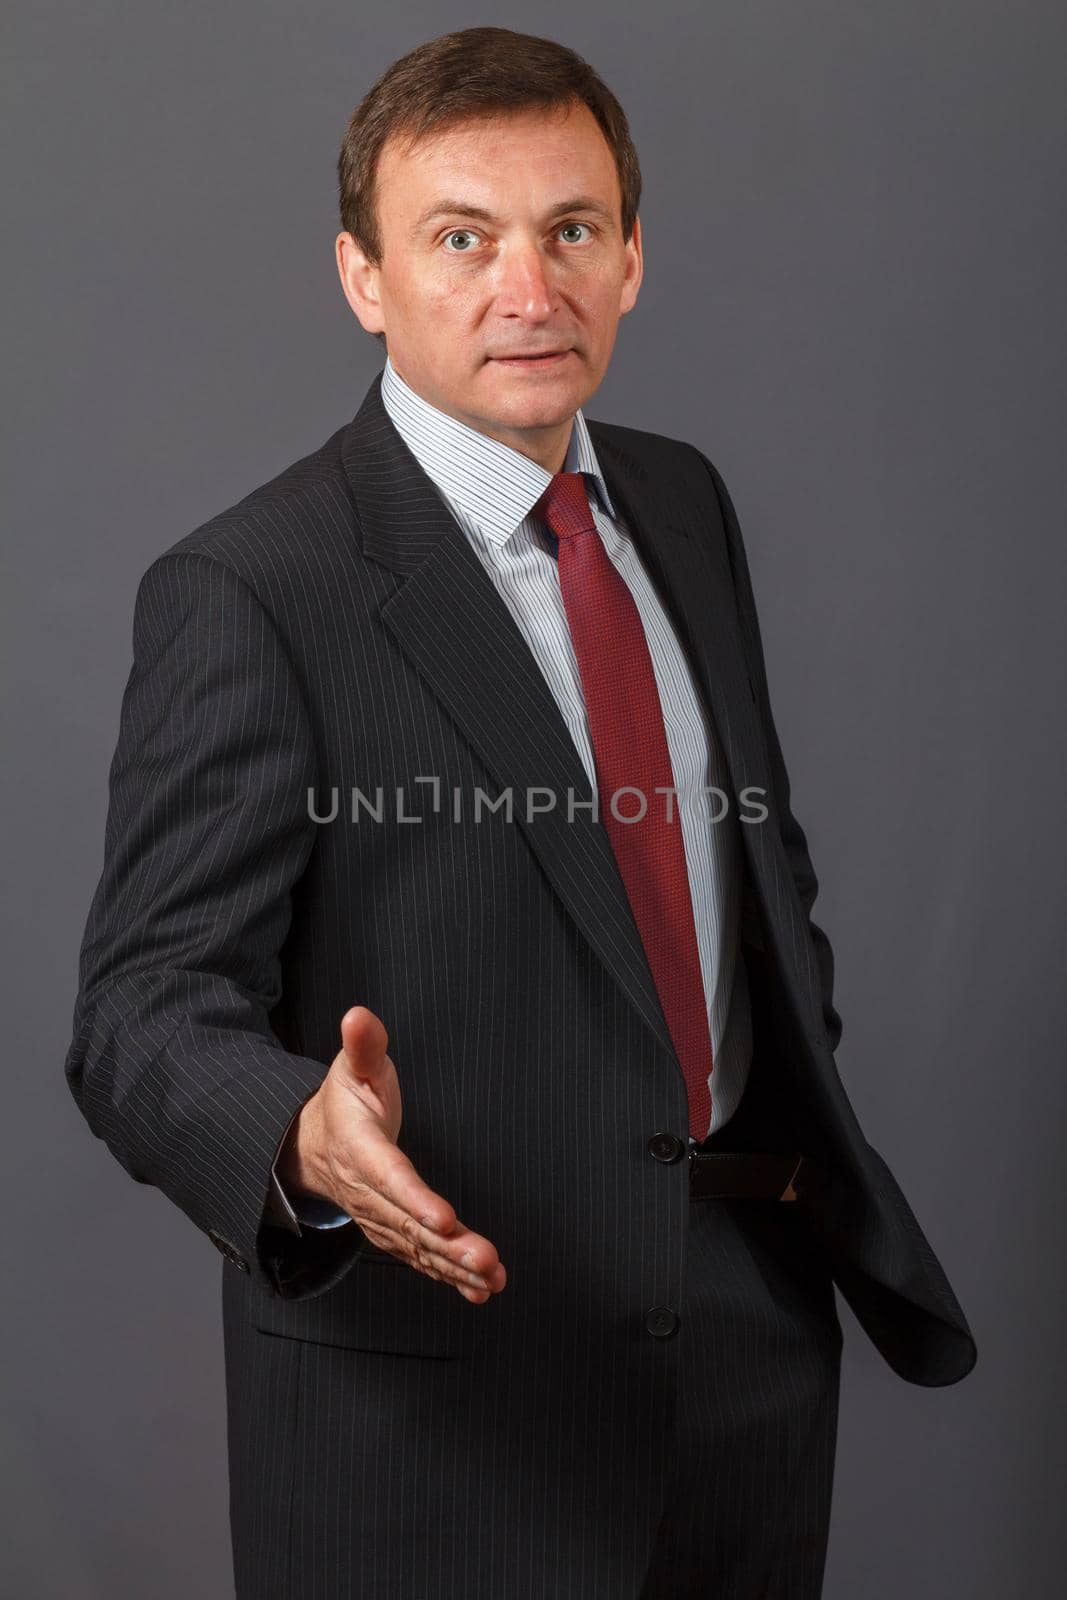 Confident and friendly elegant handsome mature businessman standing in front of a gray background in a studio giving a hand for greetings